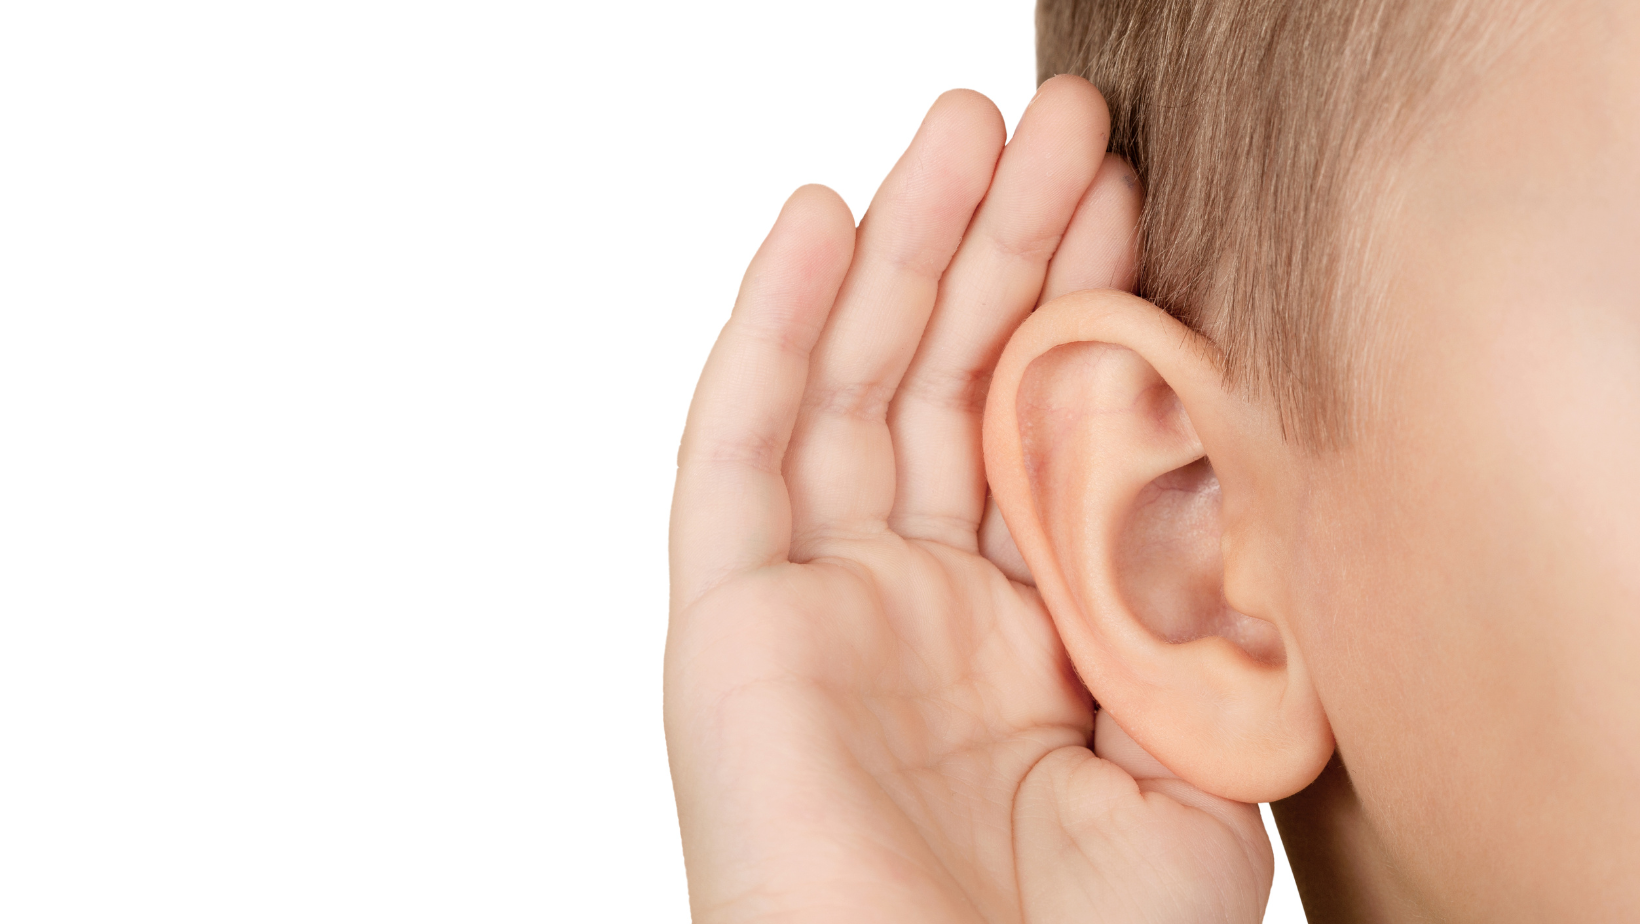 How to Safely Clean My Child's Ears